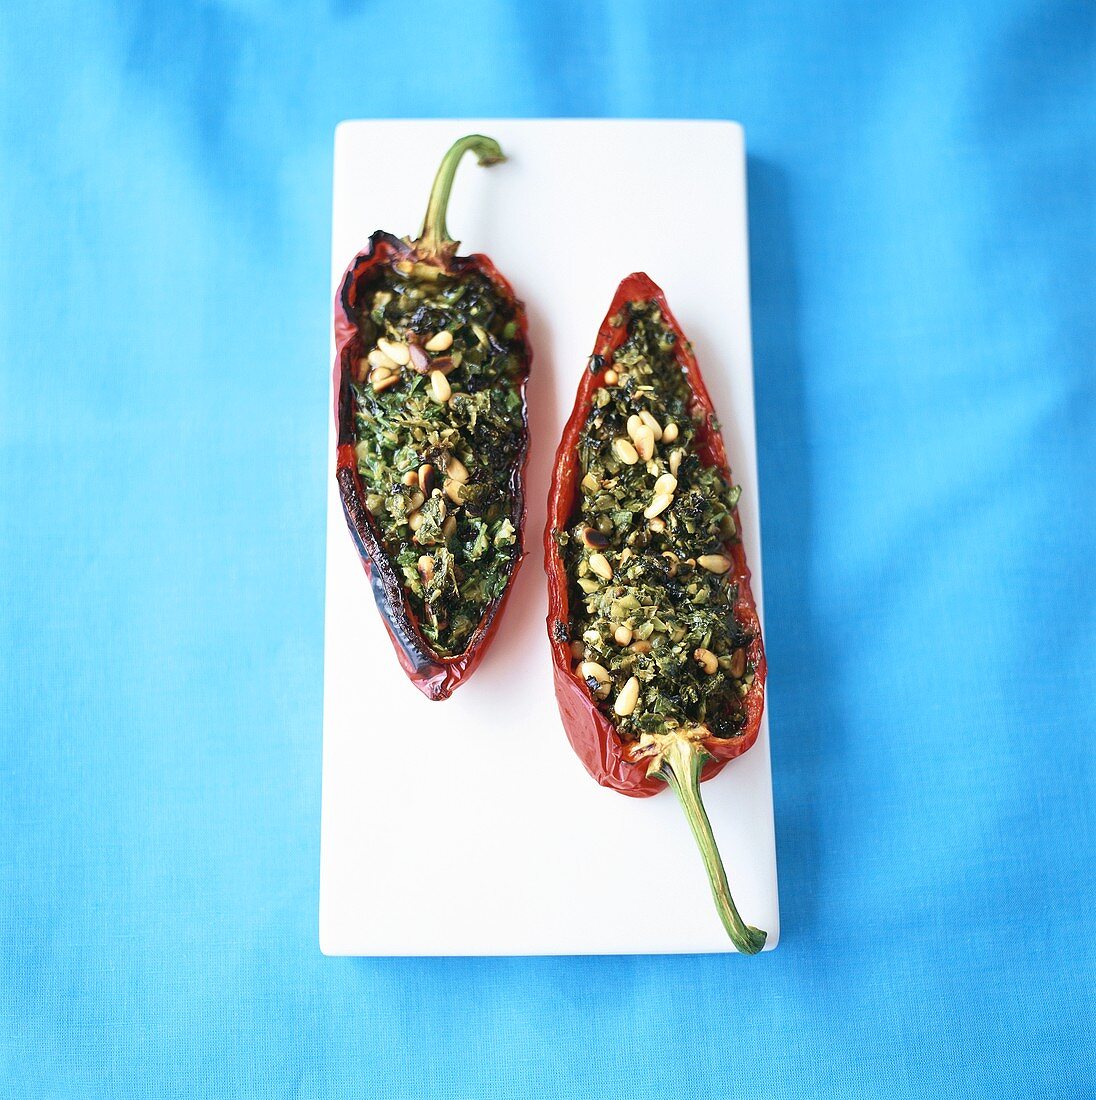 Pepper stuffed with kale and pine nuts